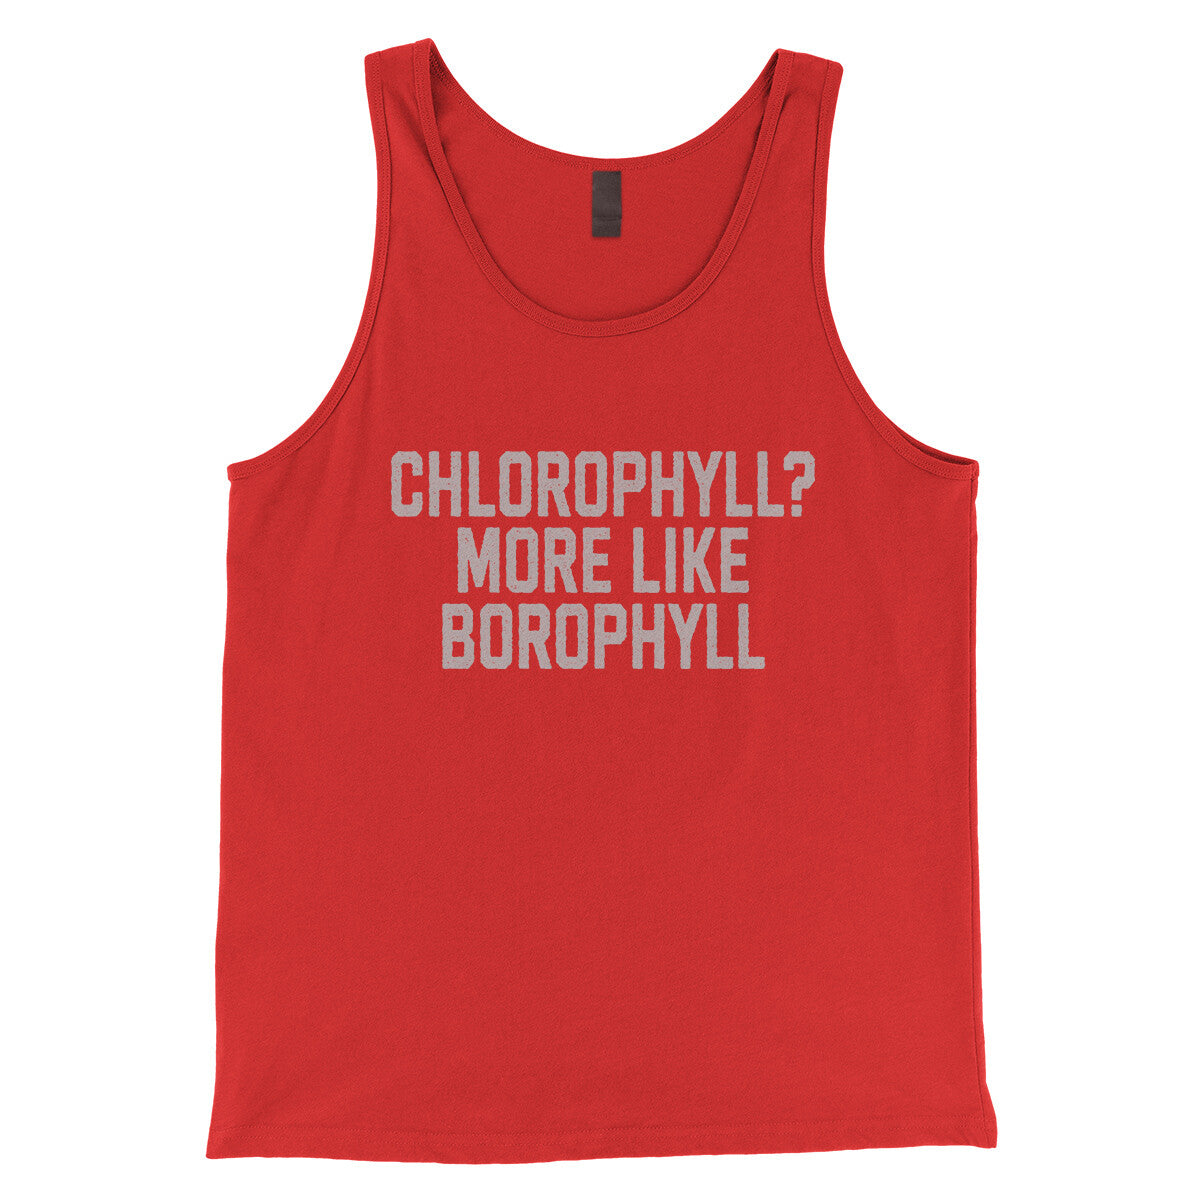 Chlorophyll More Like Borophyll in Red Color